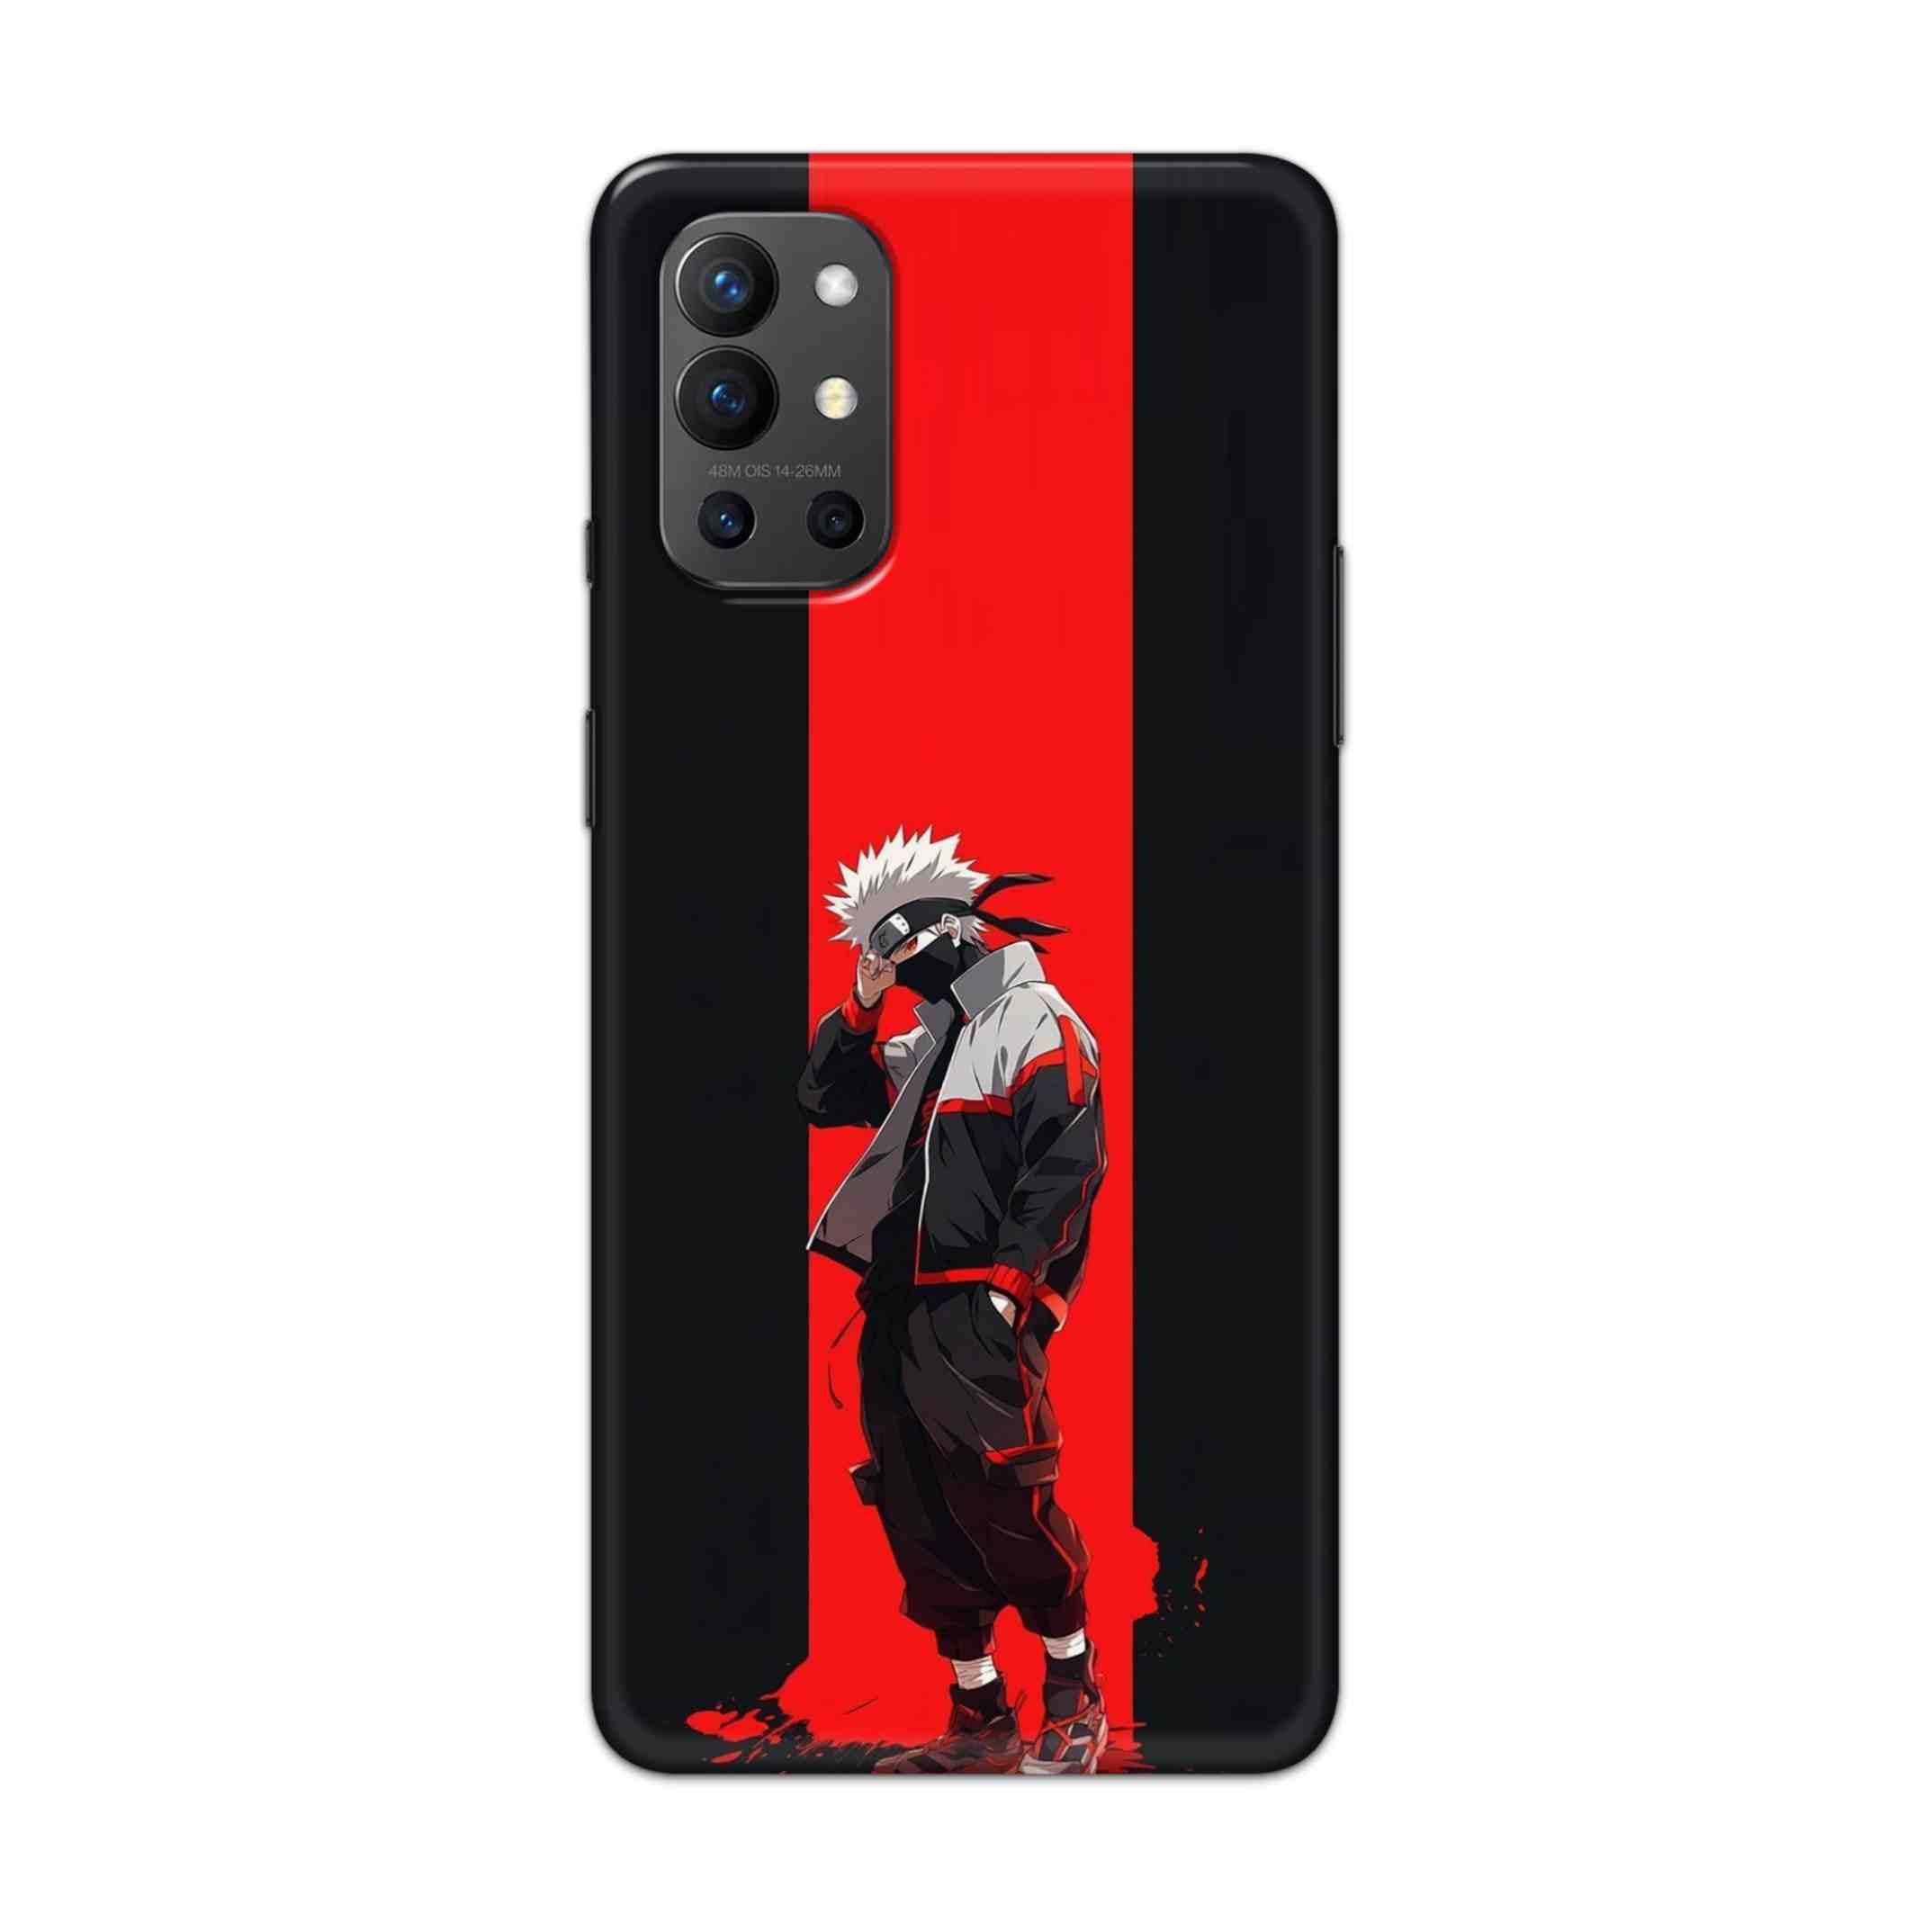 Buy Steins Hard Back Mobile Phone Case Cover For OnePlus 9R / 8T Online